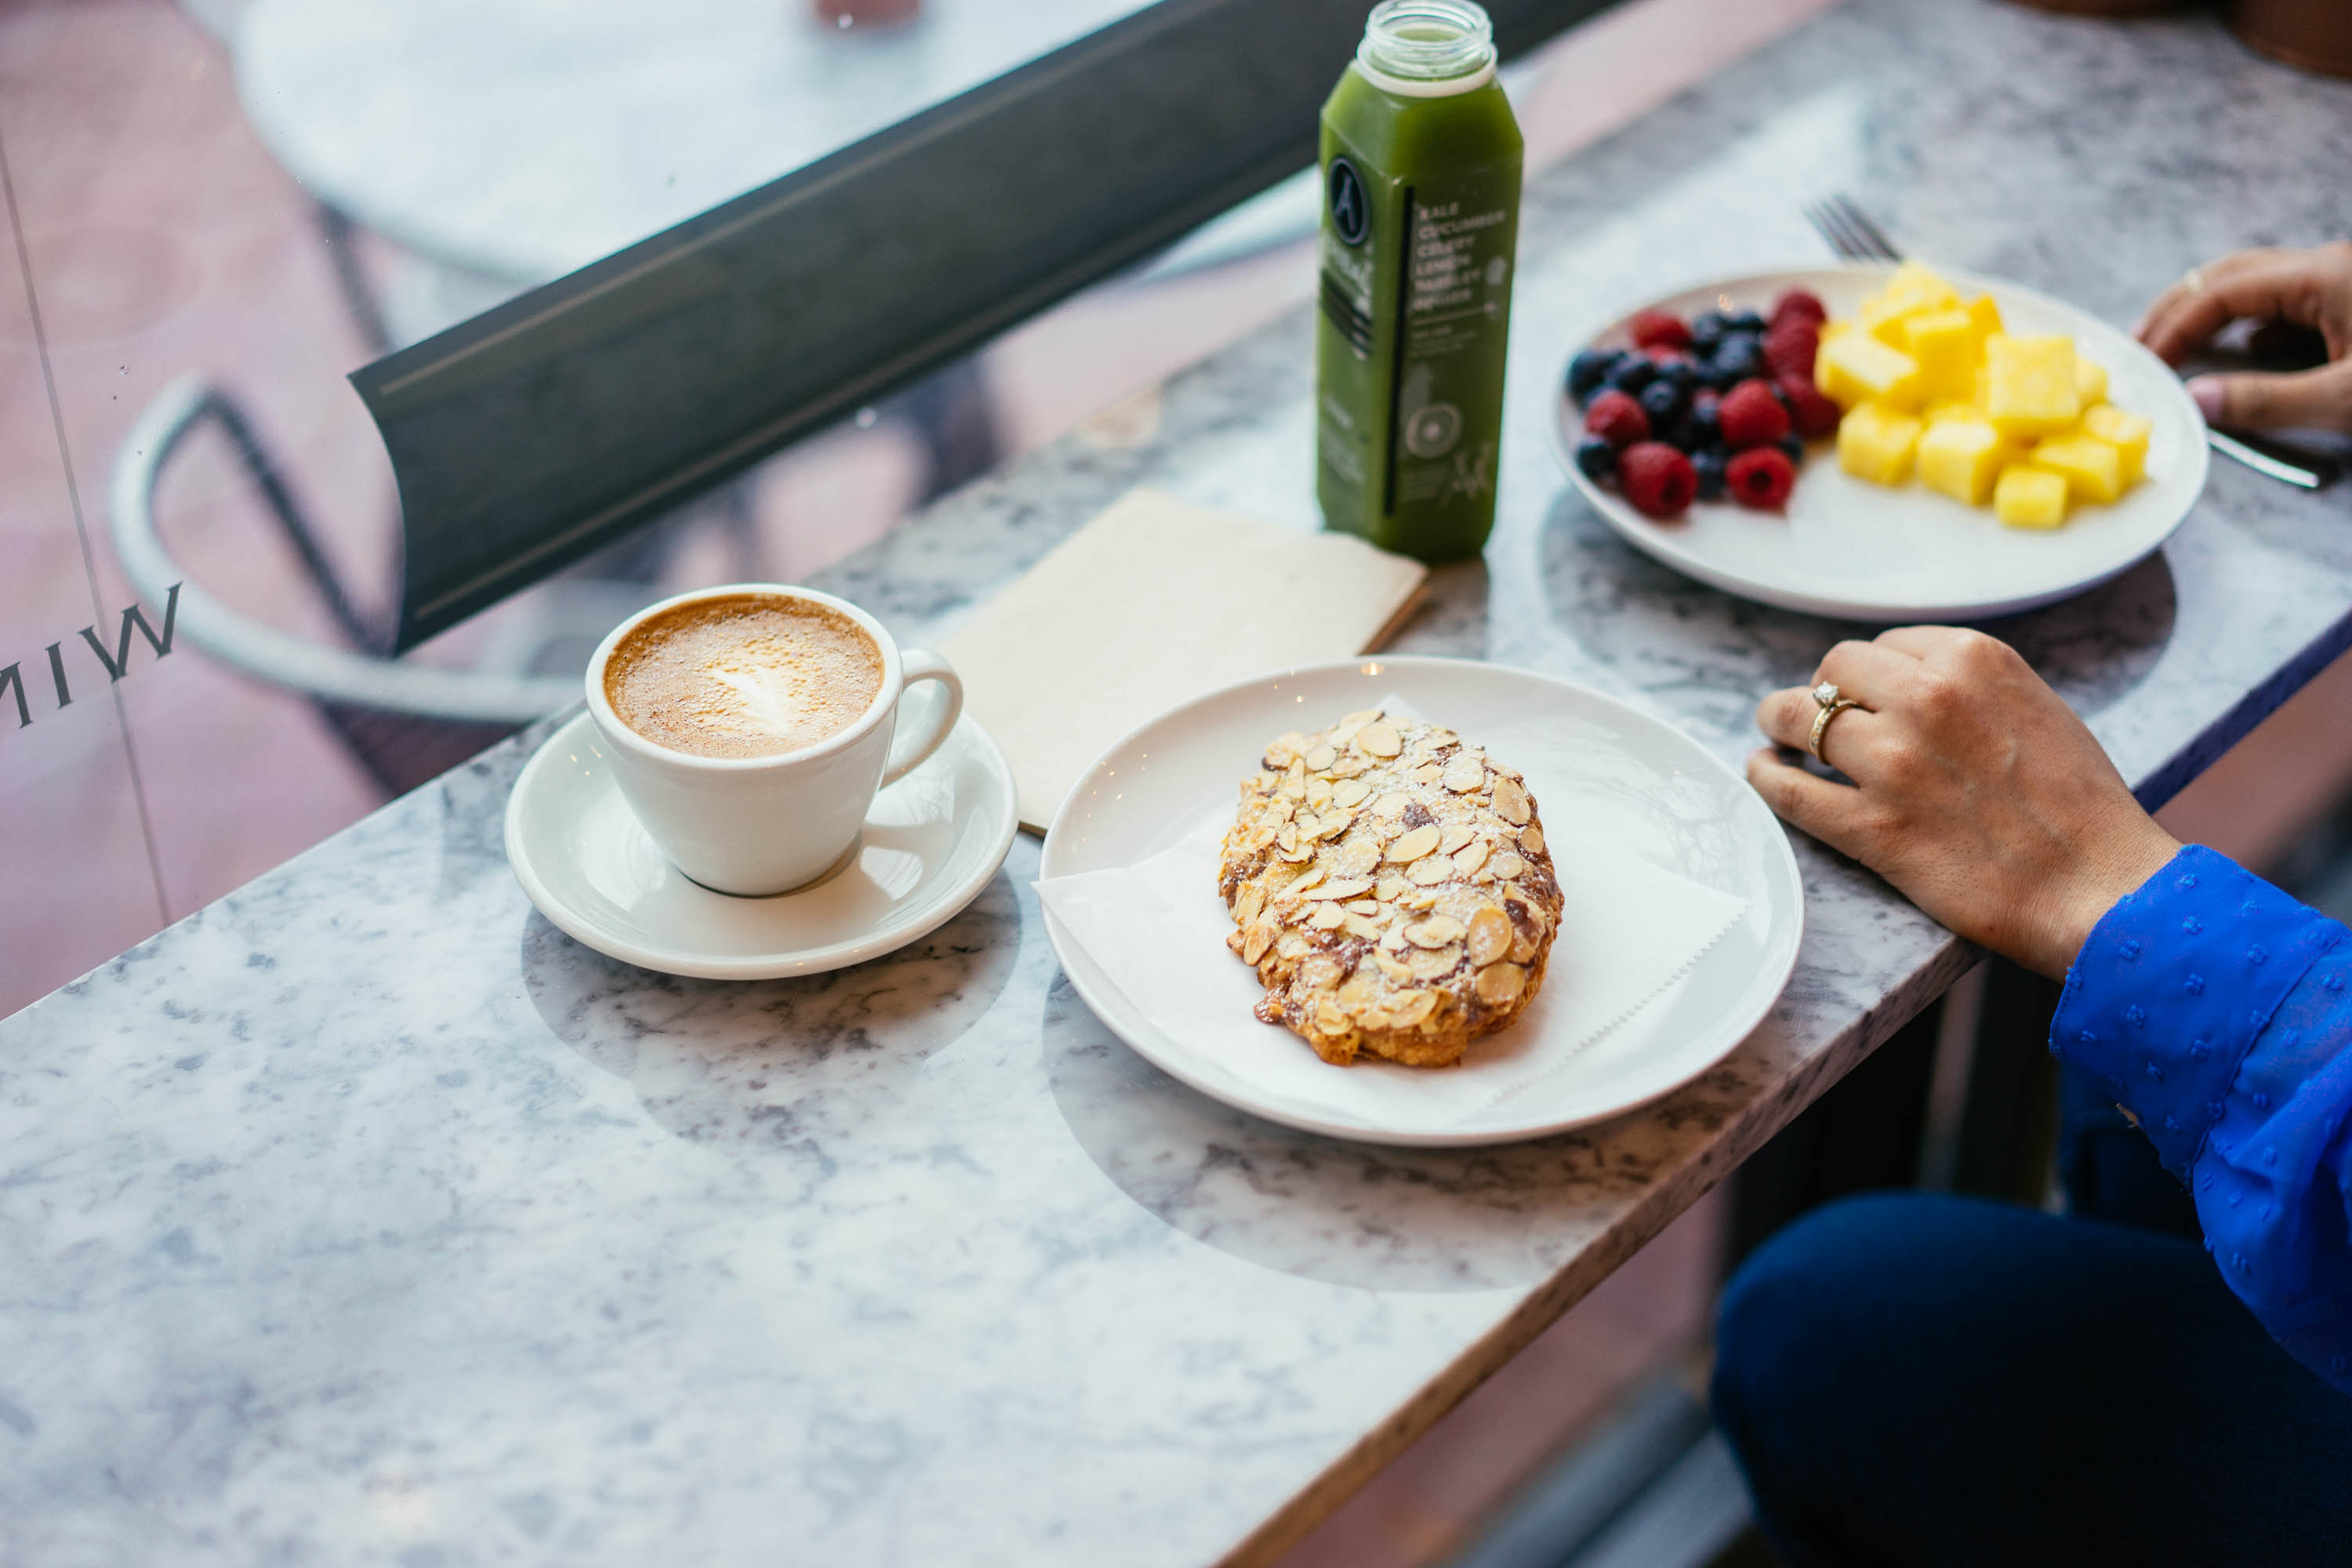 Countertop with coffee, croissant, fruit, and green juice.